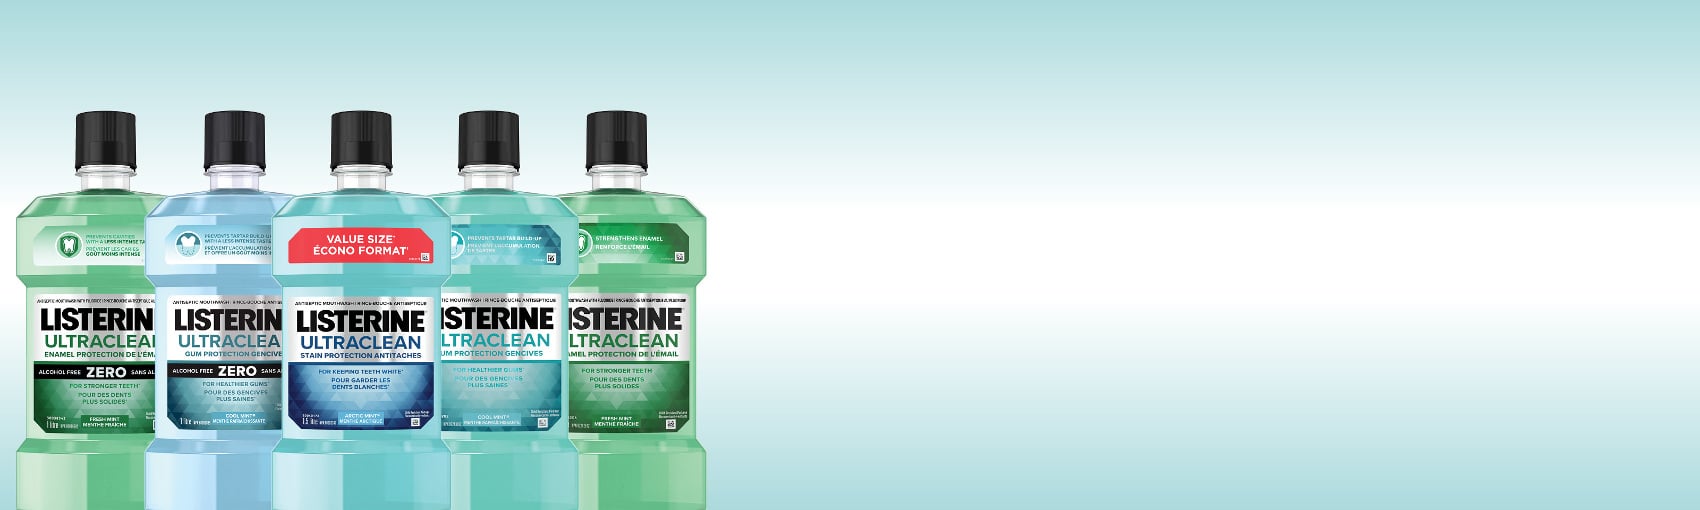 A banner with two Listerine Ultraclean zero  and three Ultraclean mouthwash products for stain, gum, and enamel protection